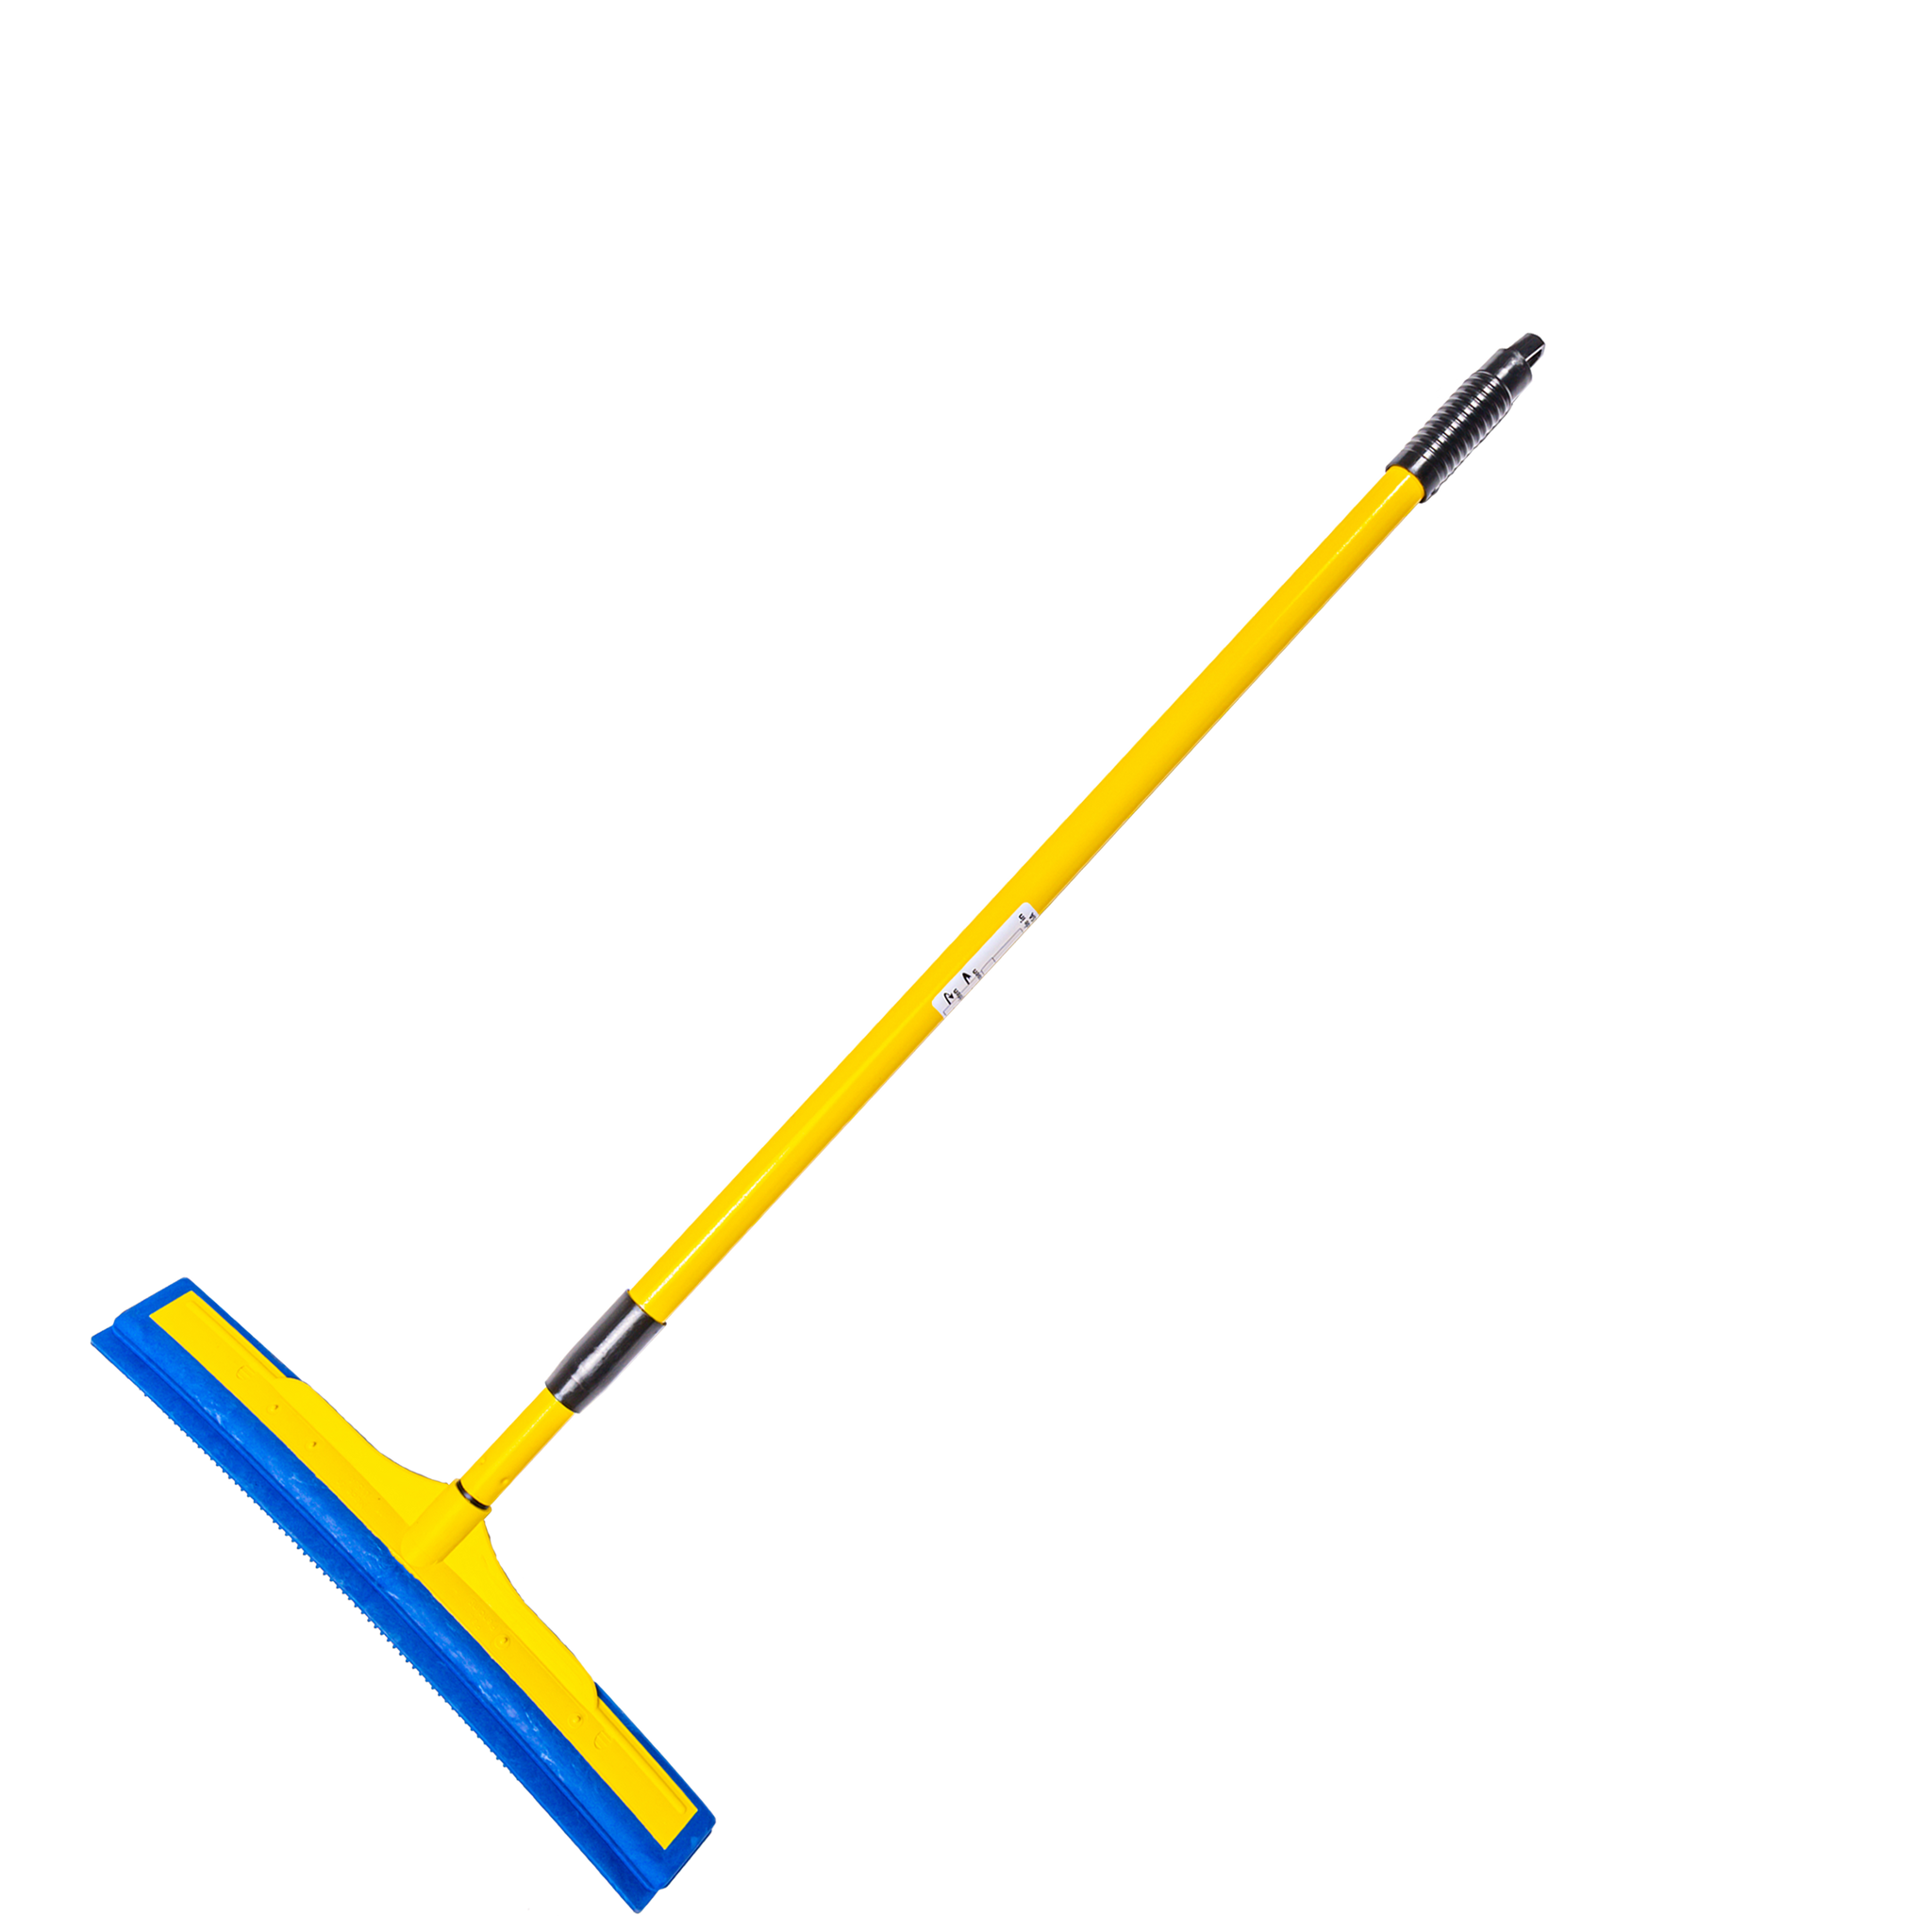 Window Cleaning Kit Multi Use Squeegee Long Telescopic Handle